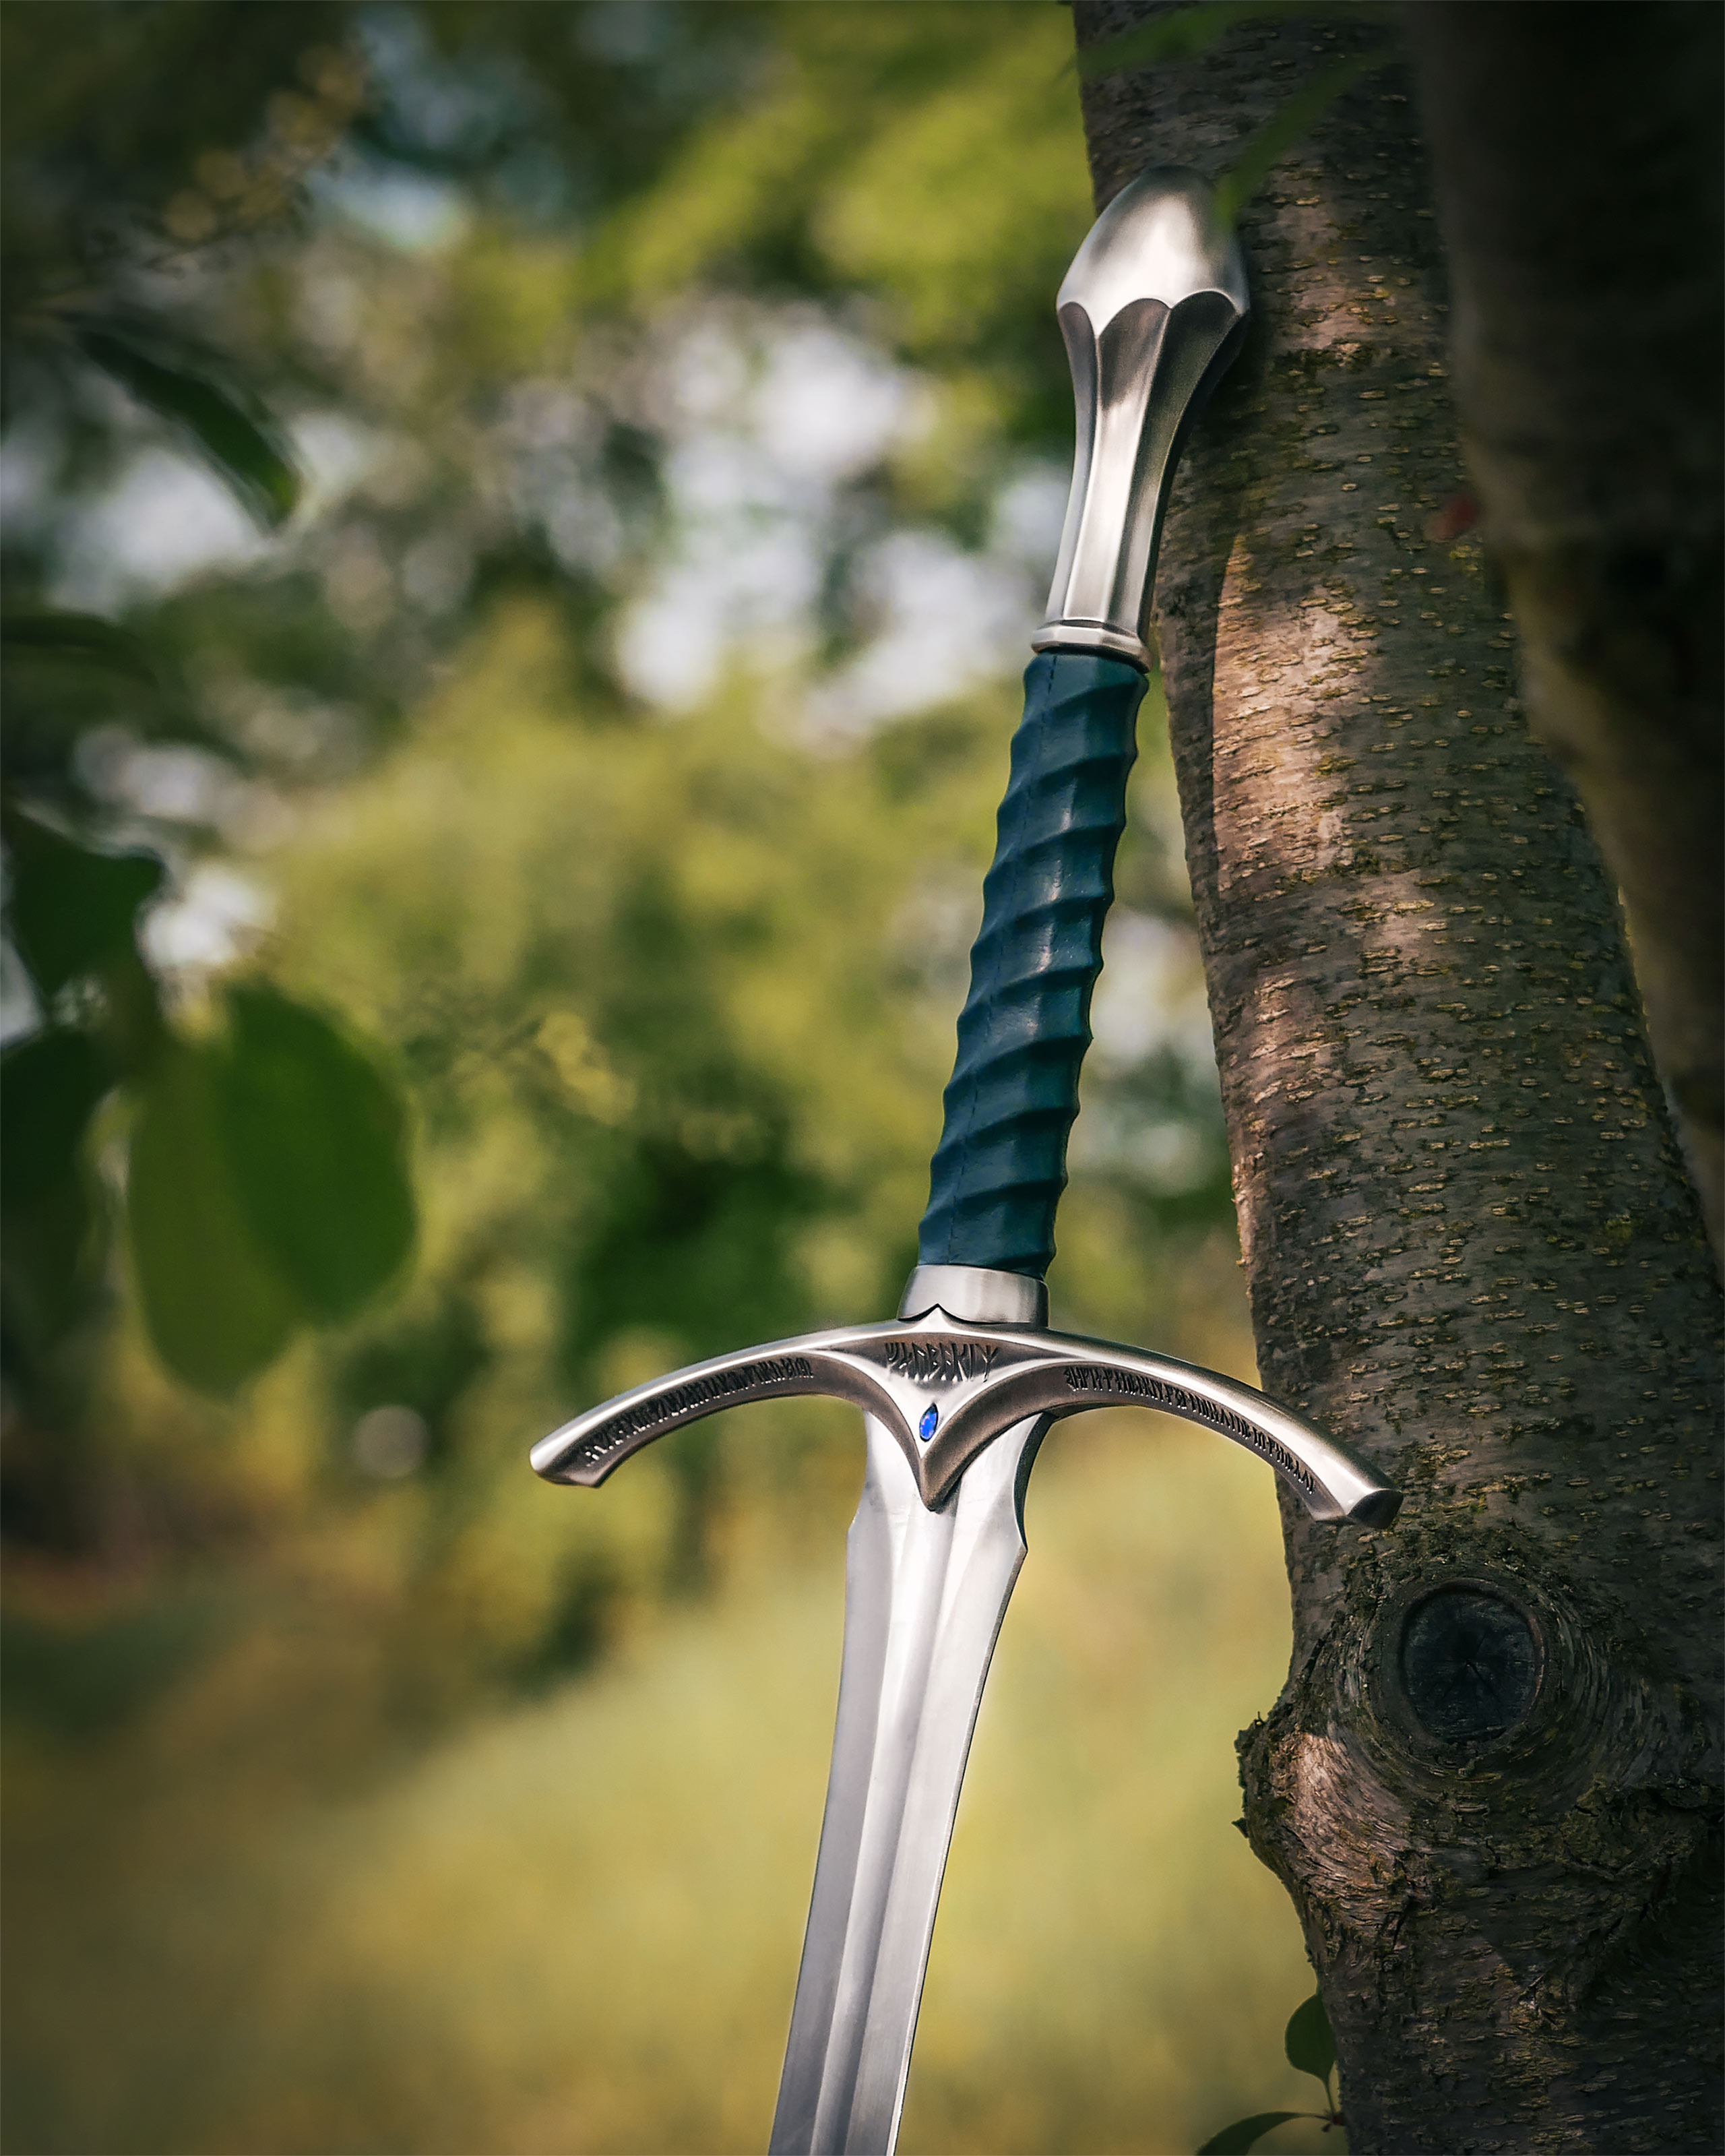 Gandalf's Glamdring Zwaard Replica - Lord of the Rings